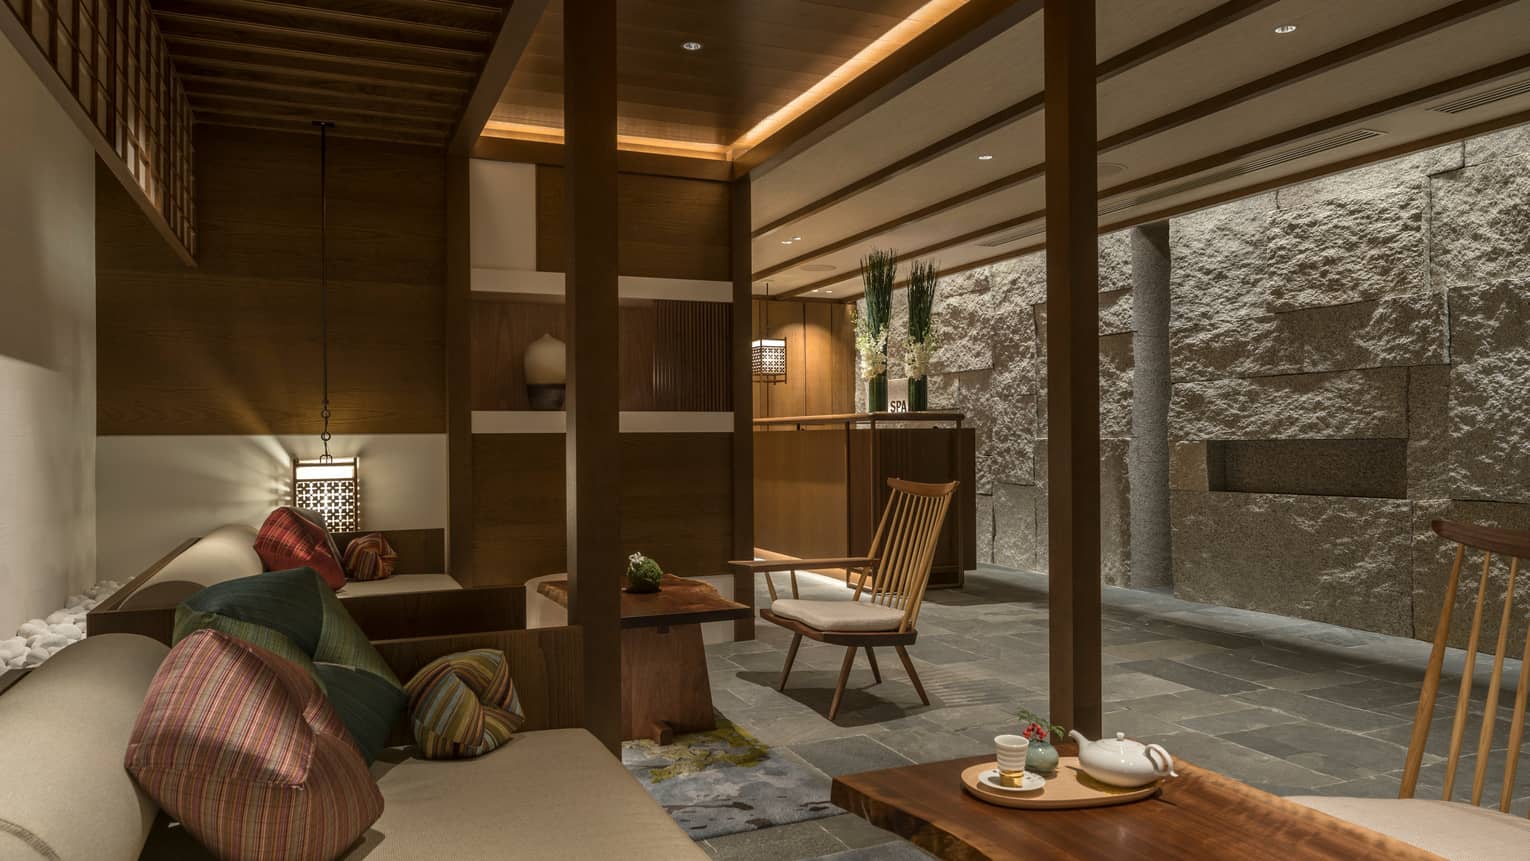 Spa lounge with plush bench, cushions, tea on table, lanterns, rock wall